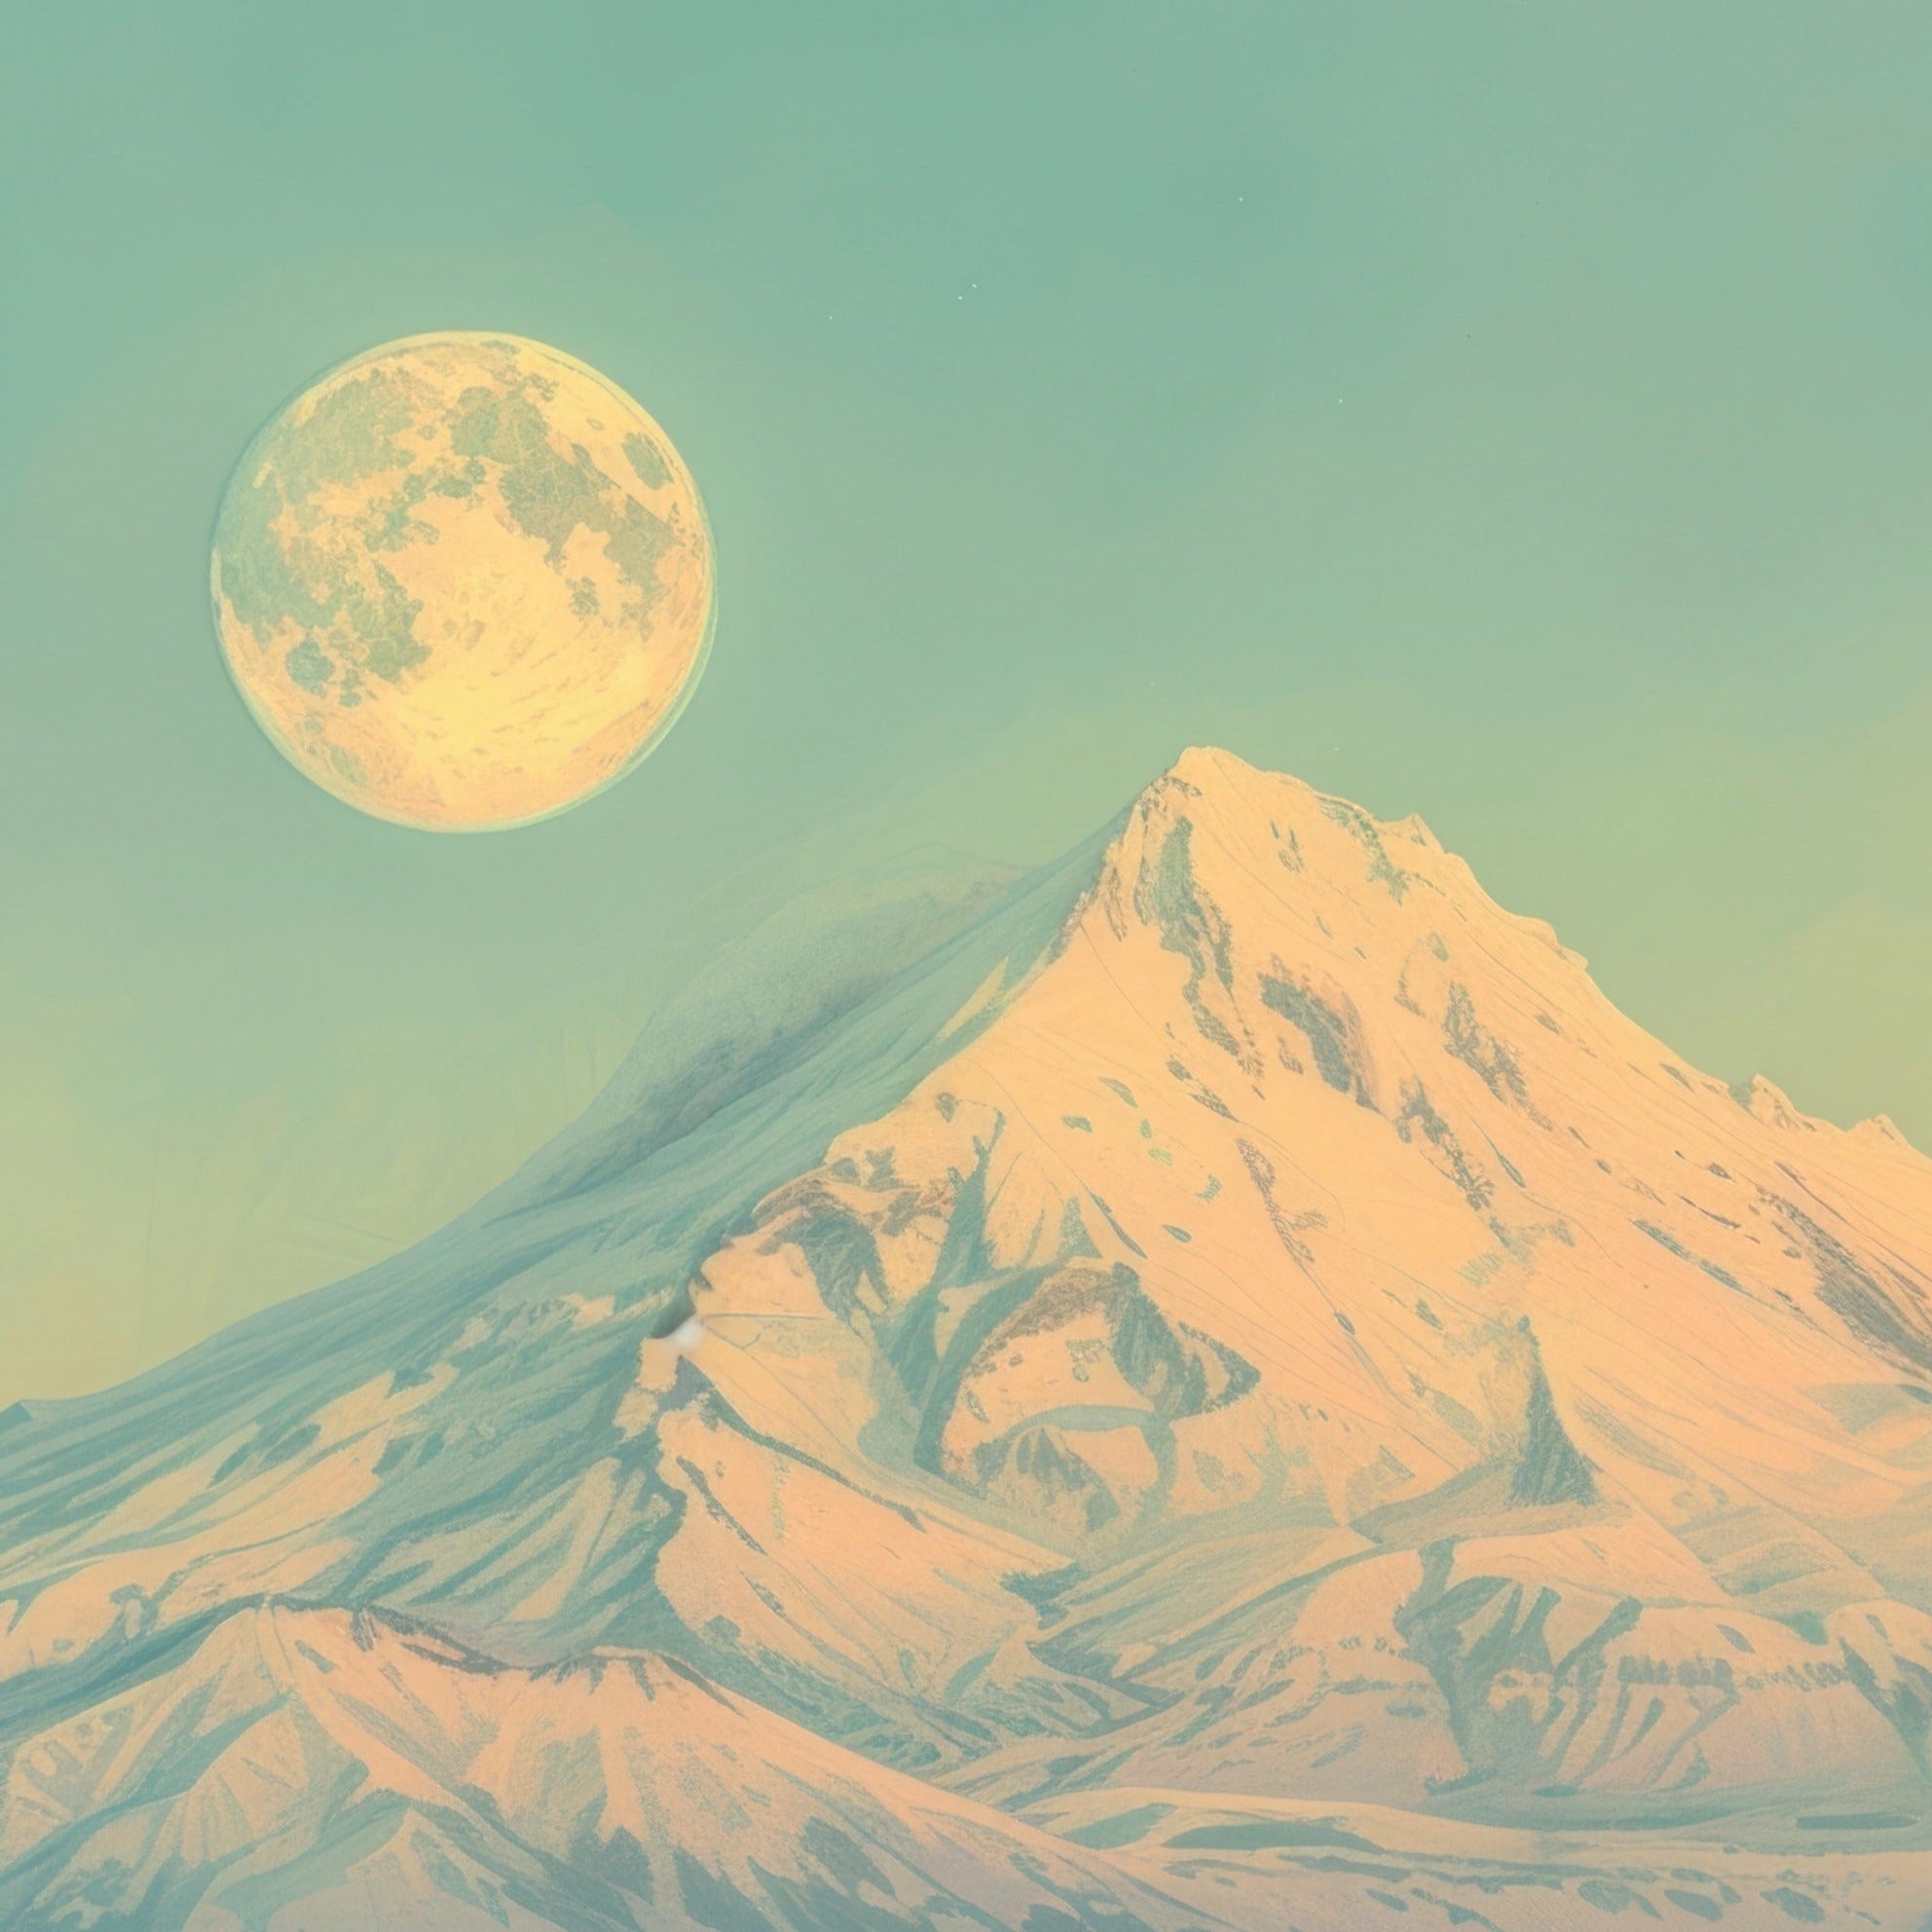 "North Face Mural wallpaper depicting a snowy mountain peak under a full moon."